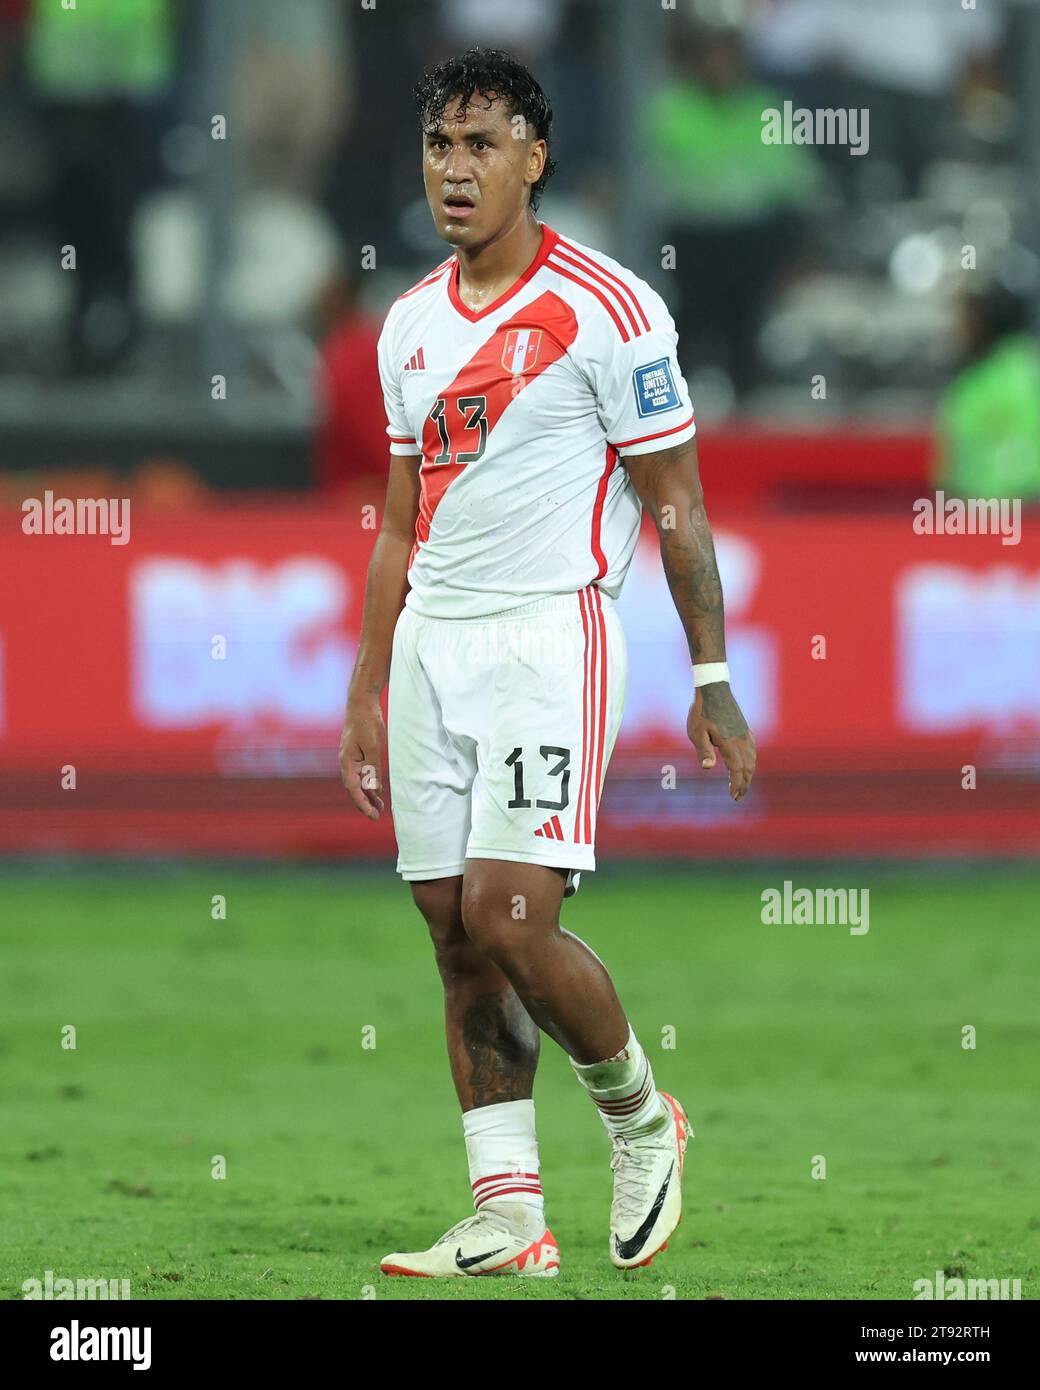 Lima, Peru. 21st Nov, 2023. Renato Tapia of Peru during the FIFA 2024 World Cup qualifying round match between Peru and Venezuela played at Nacional de Lima Stadium on November 21 in Lima, Peru. (Photo by Miguel Marrufo/PRESSINPHOTO) Credit: PRESSINPHOTO SPORTS AGENCY/Alamy Live News Stock Photo